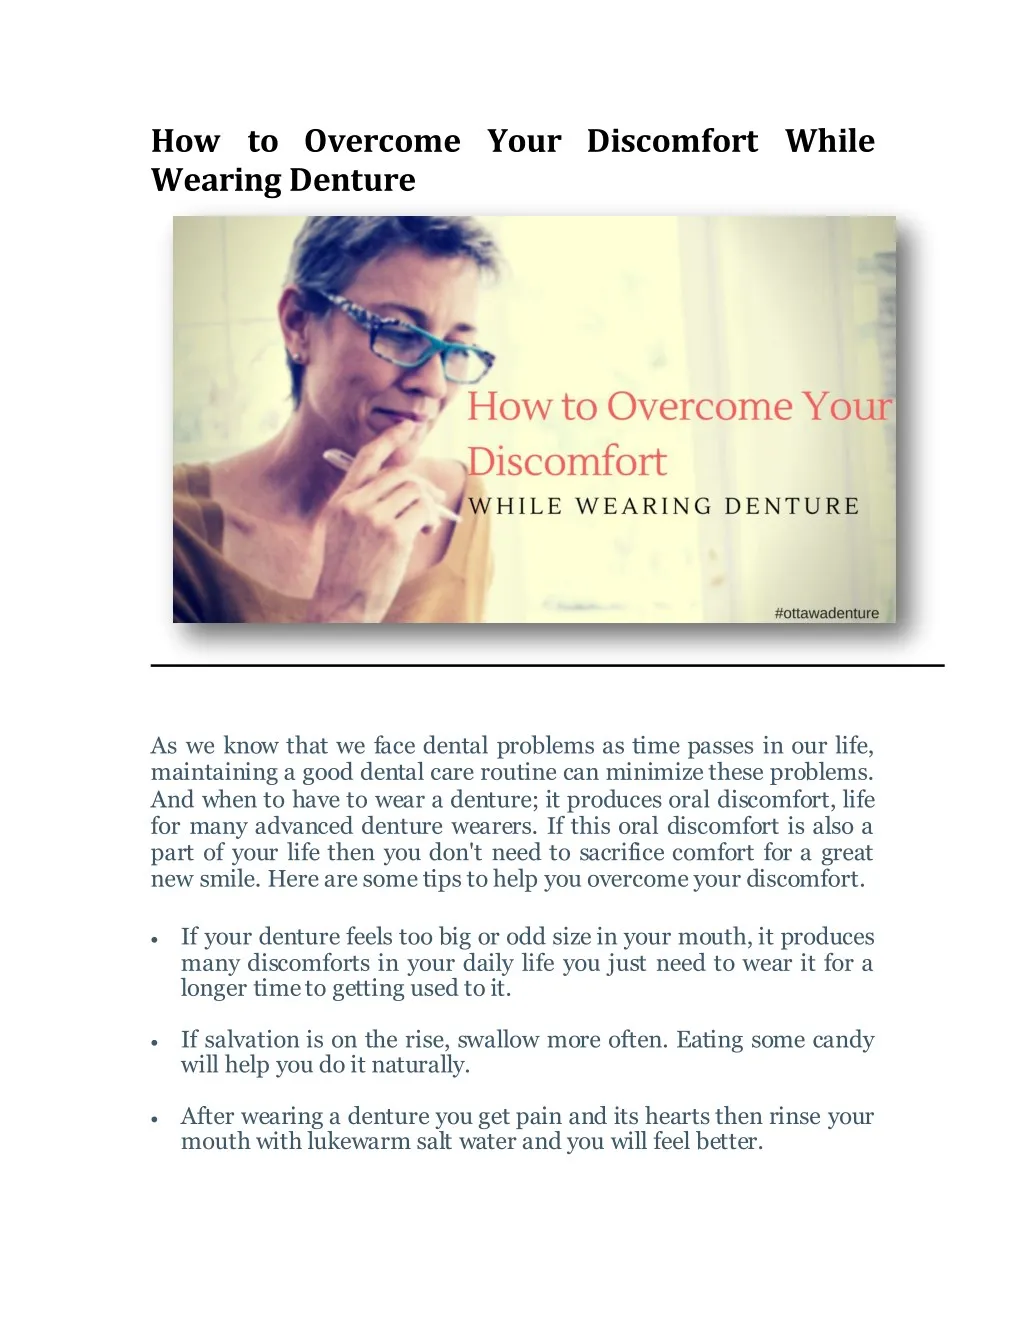 how to overcome your discomfort while wearing